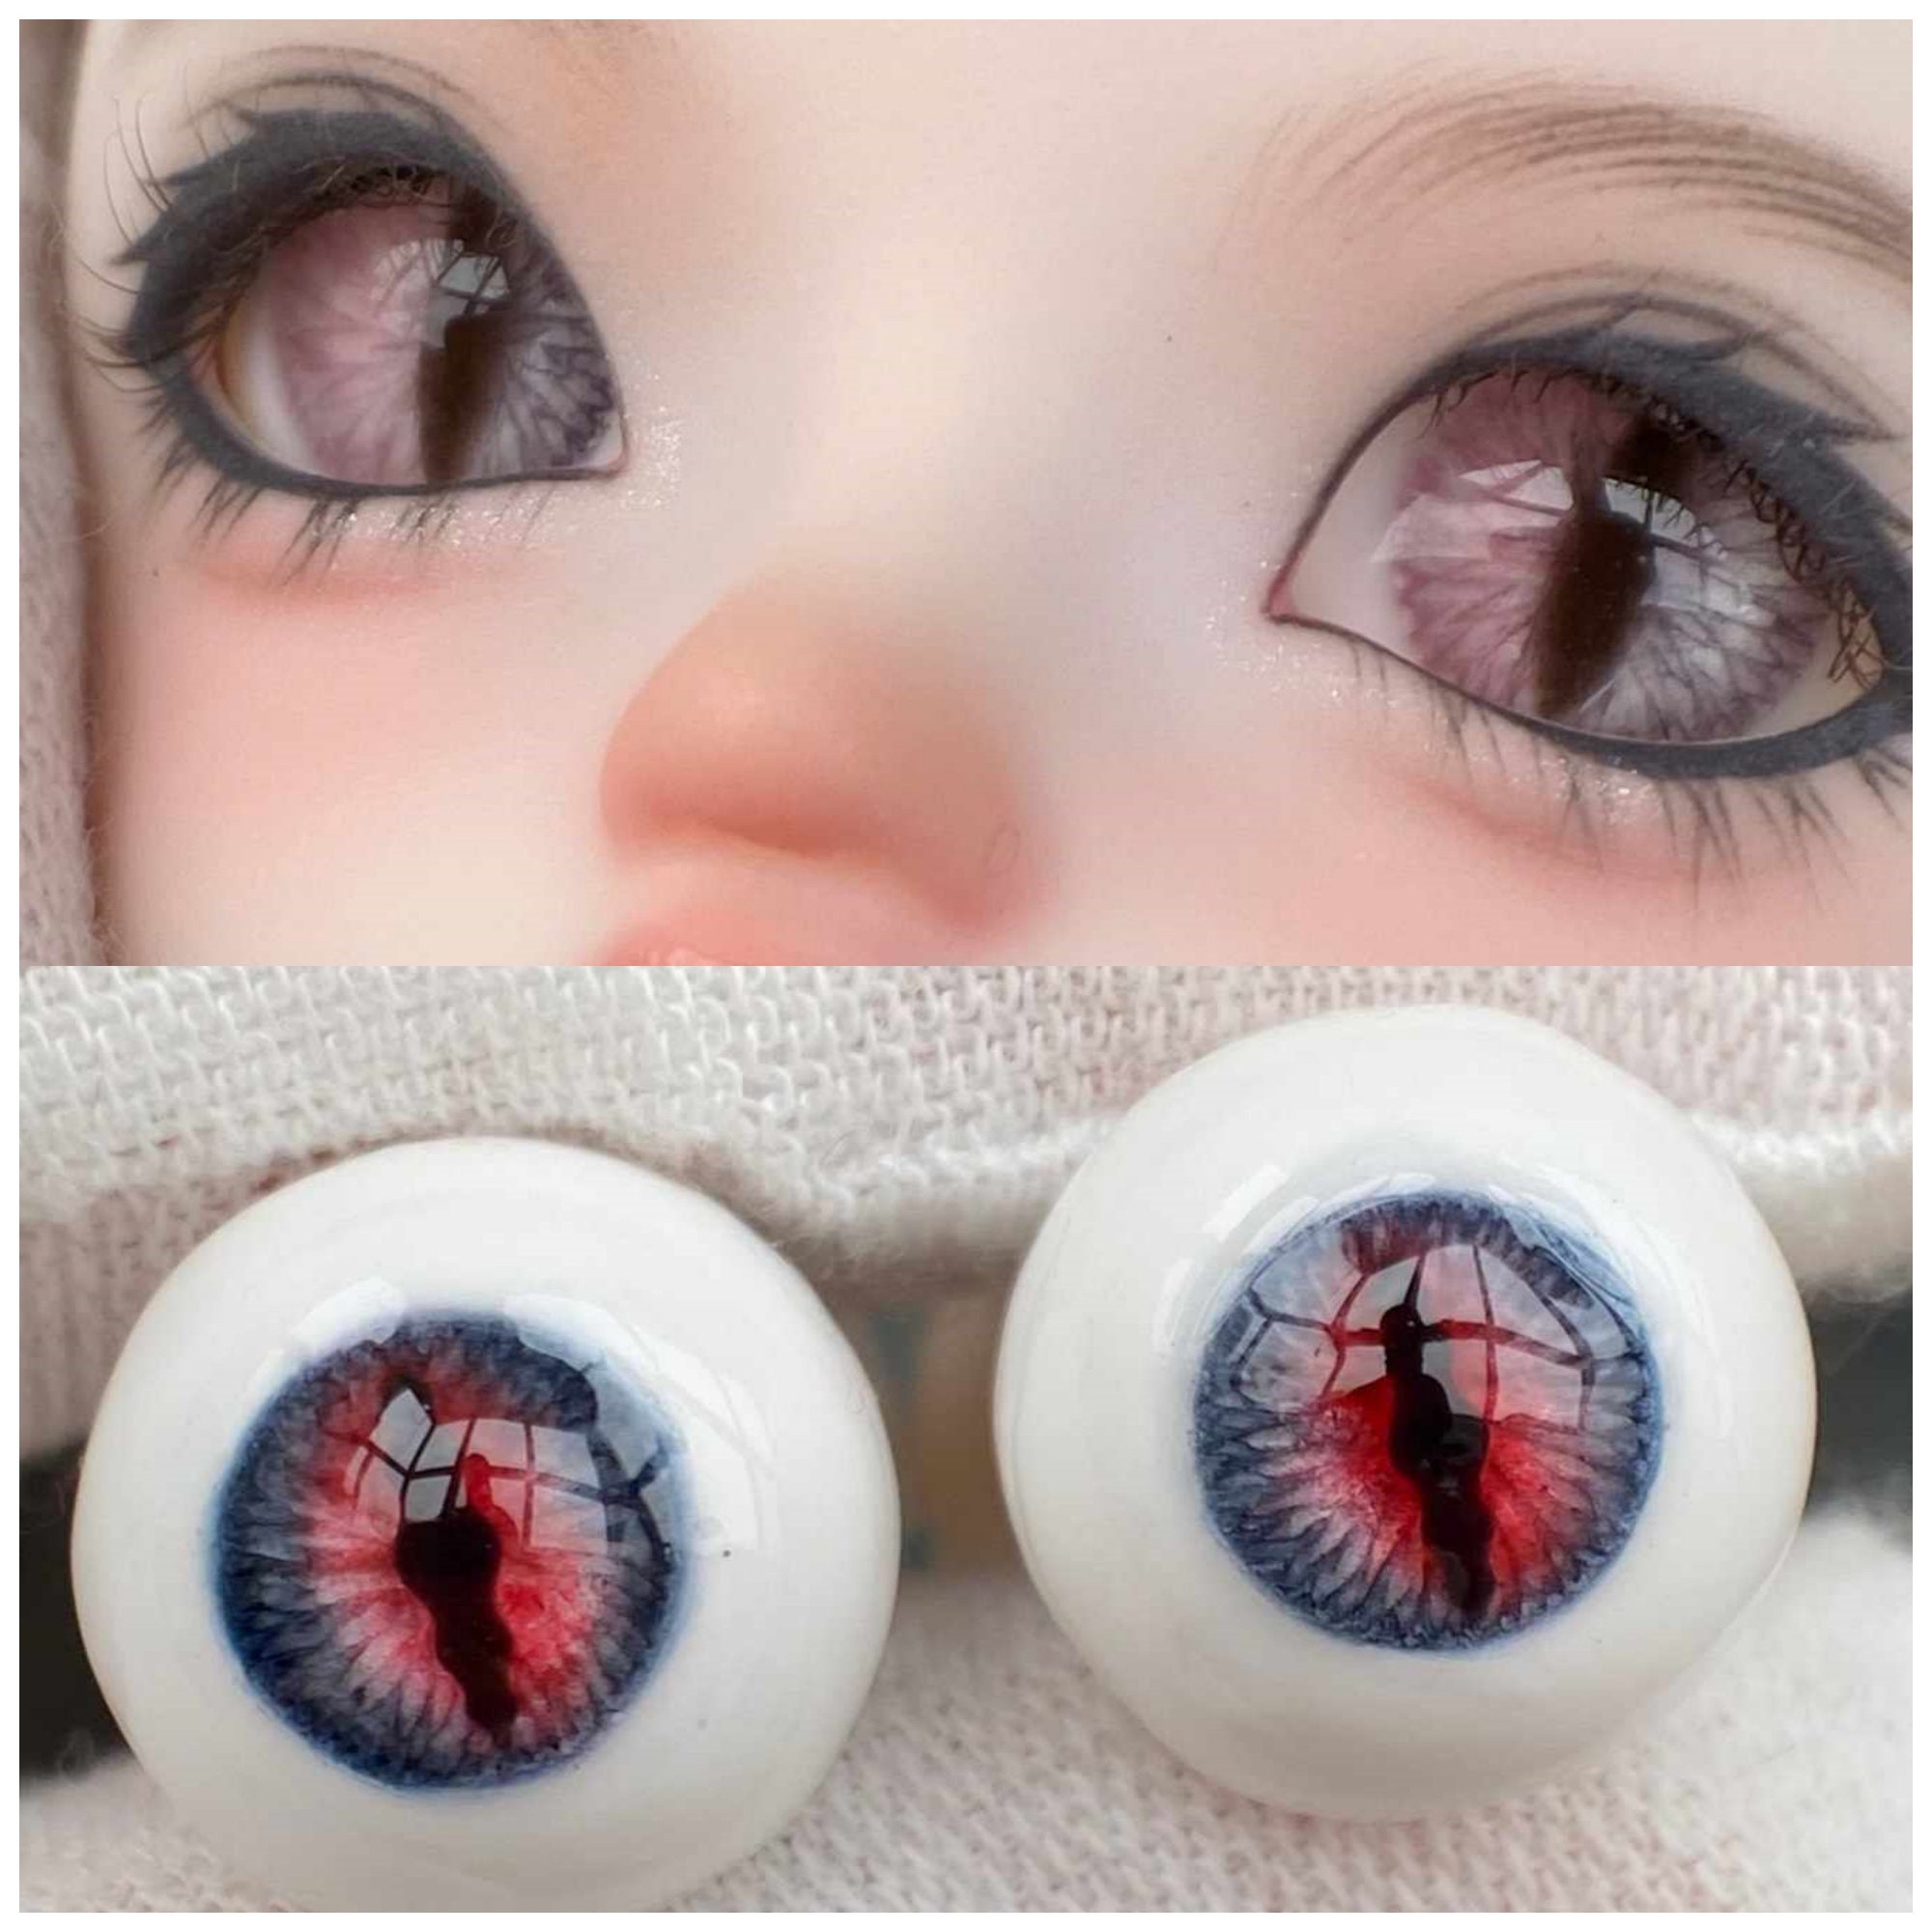 Unique eyes Light Up & Go Doll Assorted Pink